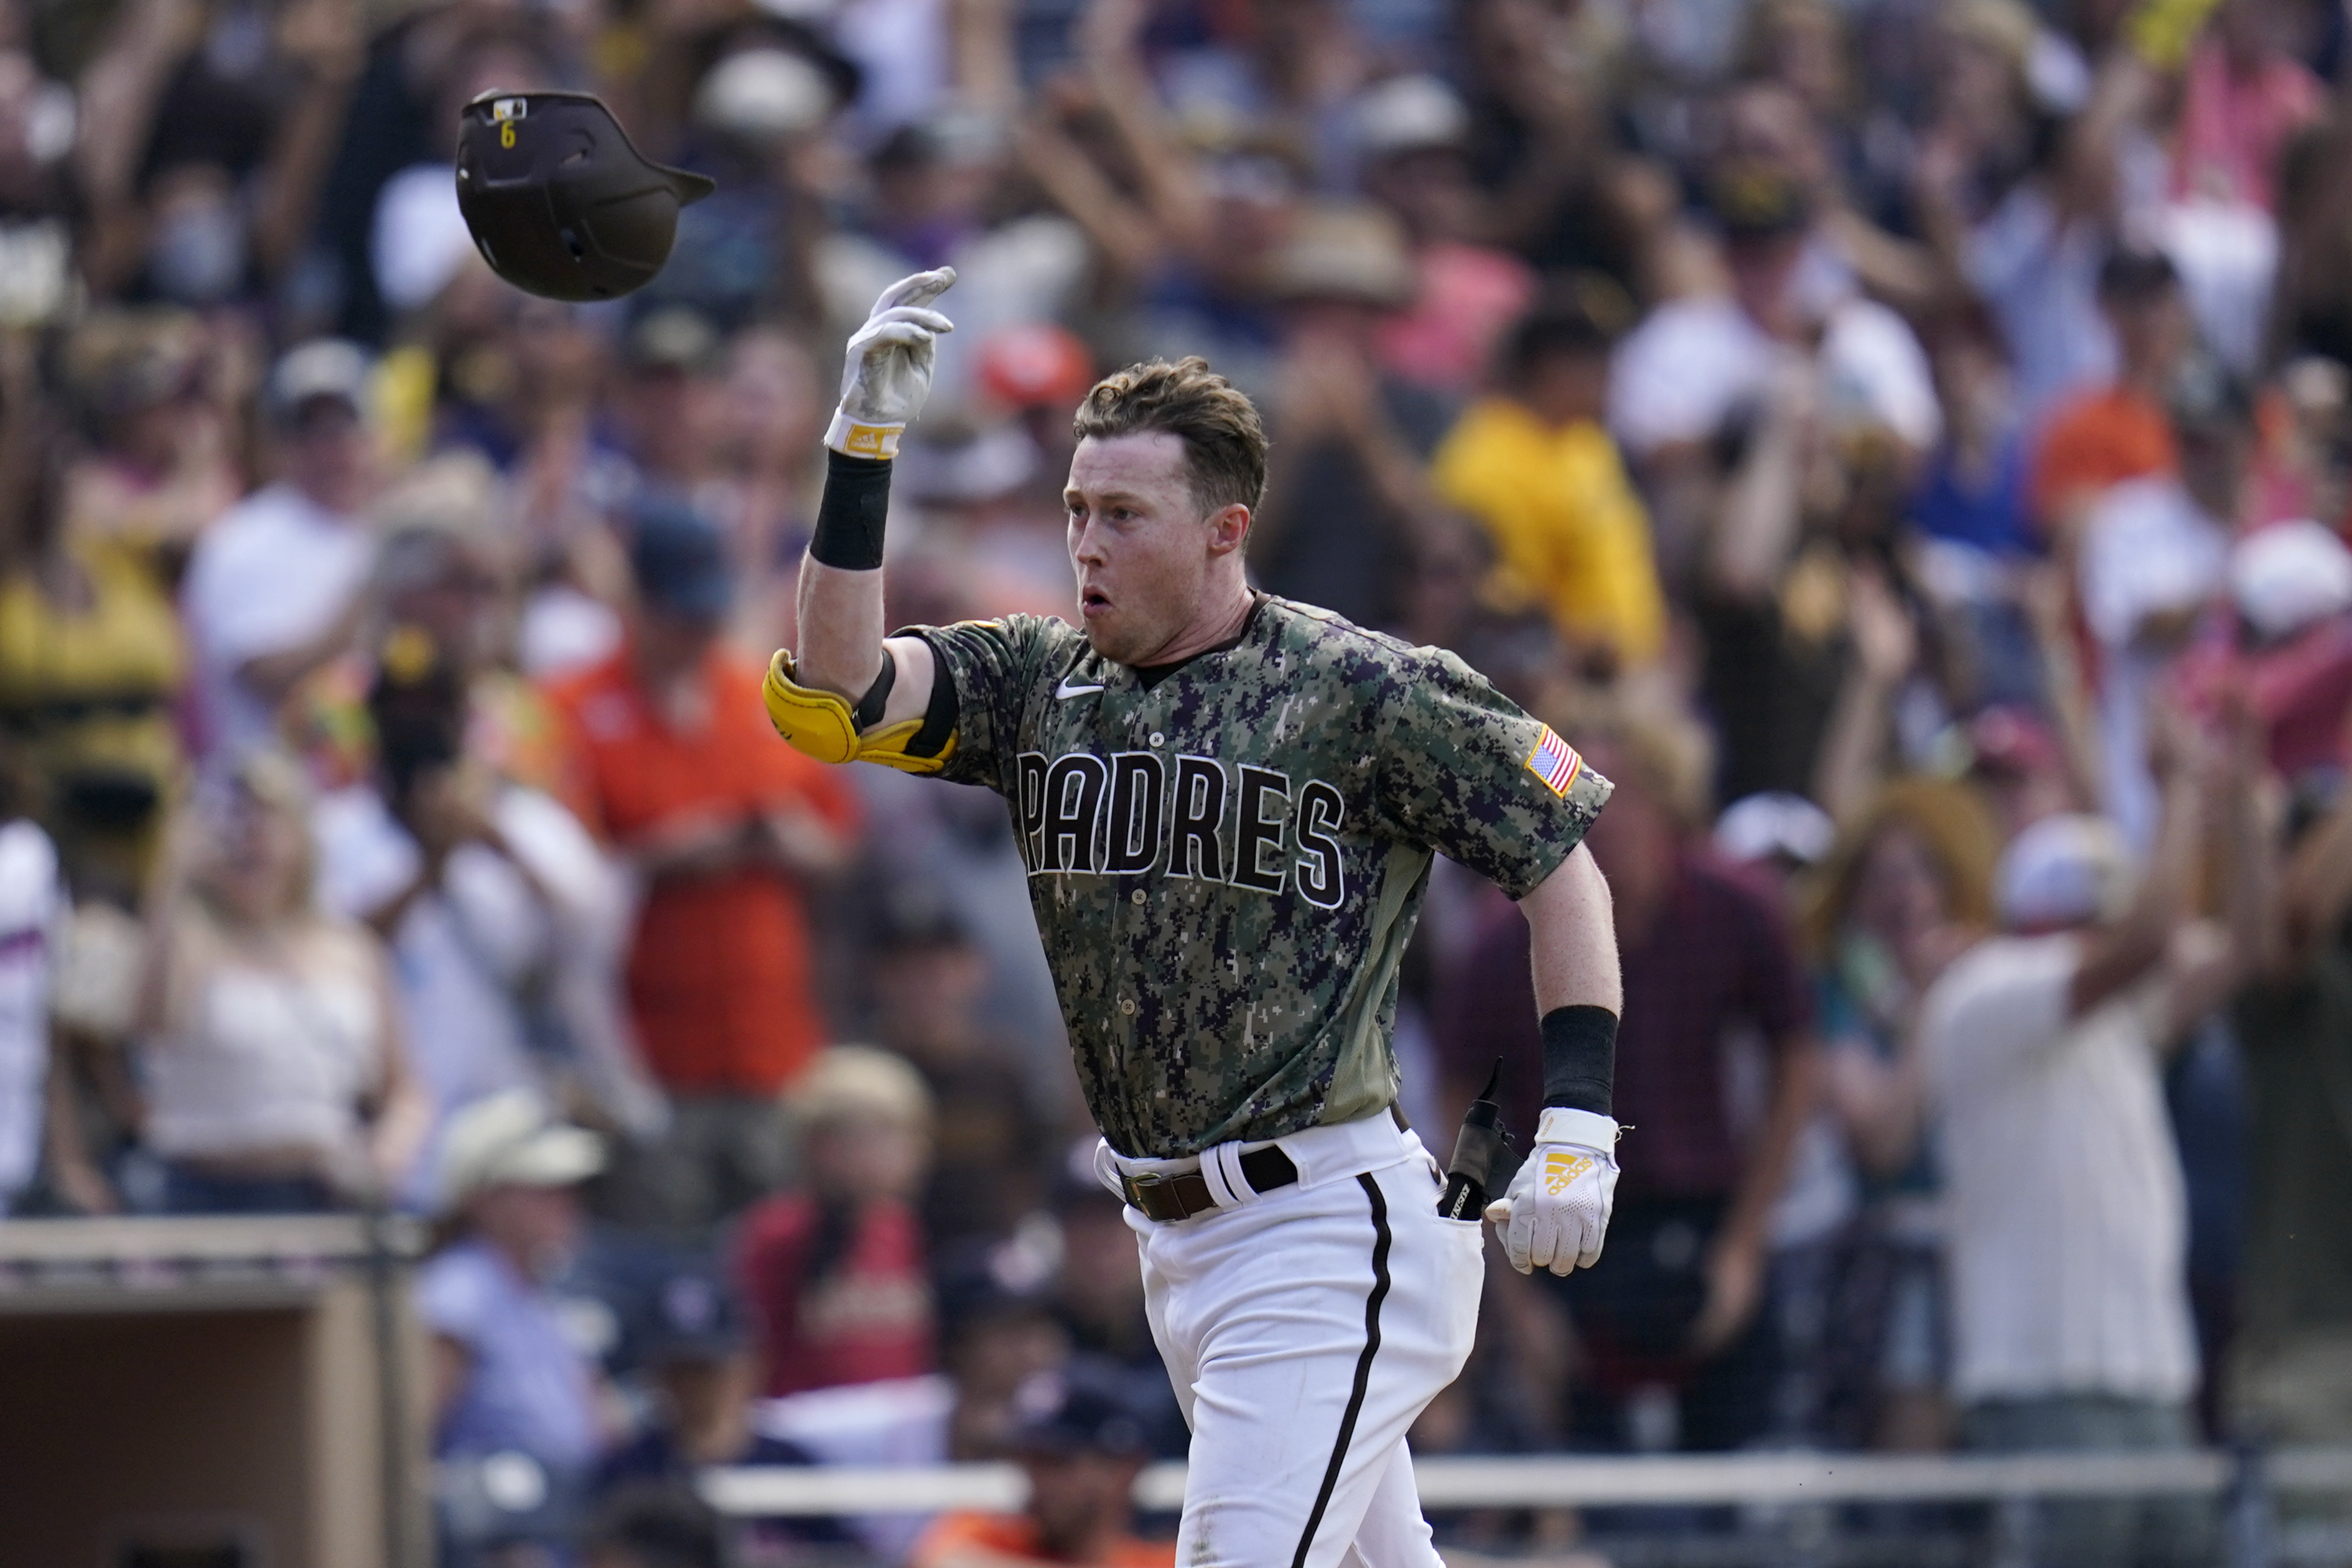 Cronenworth homers in 9th, Padres win; Stanek, Astros tumble